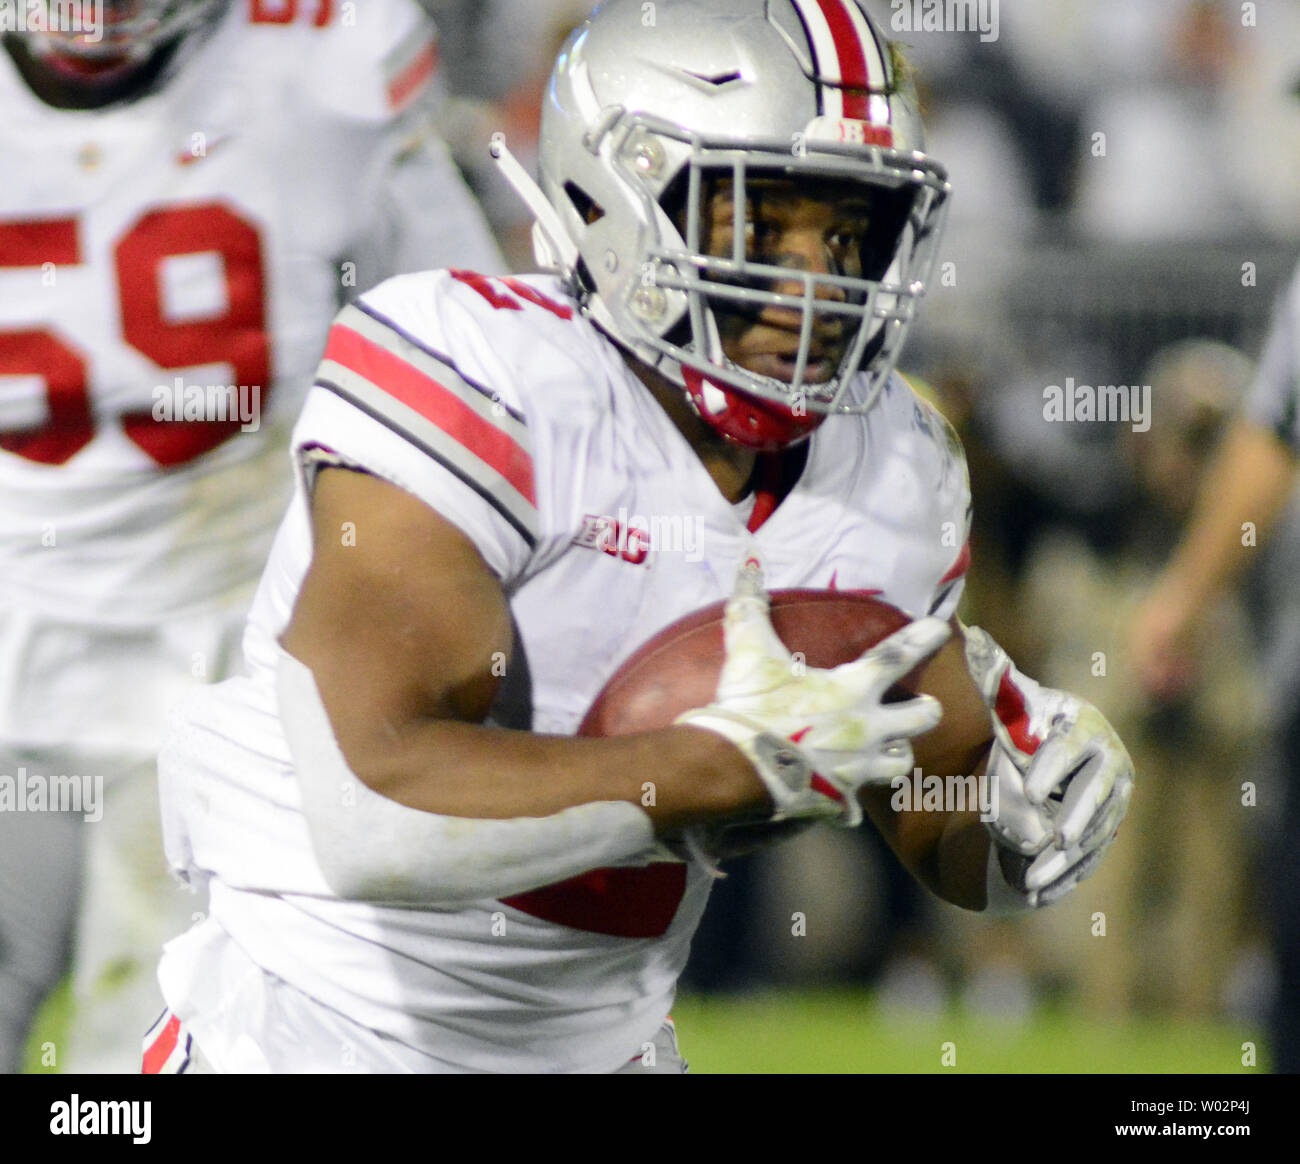 Ohio State Buckeyes running back J.K. Dobbins (2) pulls in a short pass and scores a 26 yard touchdown in the second quarter against the Penn State Nittany Lions at Beaver Stadium in State College , Pennsylvania on September 29, 2018. Photo by Archie Carpenter/UPI Stock Photo